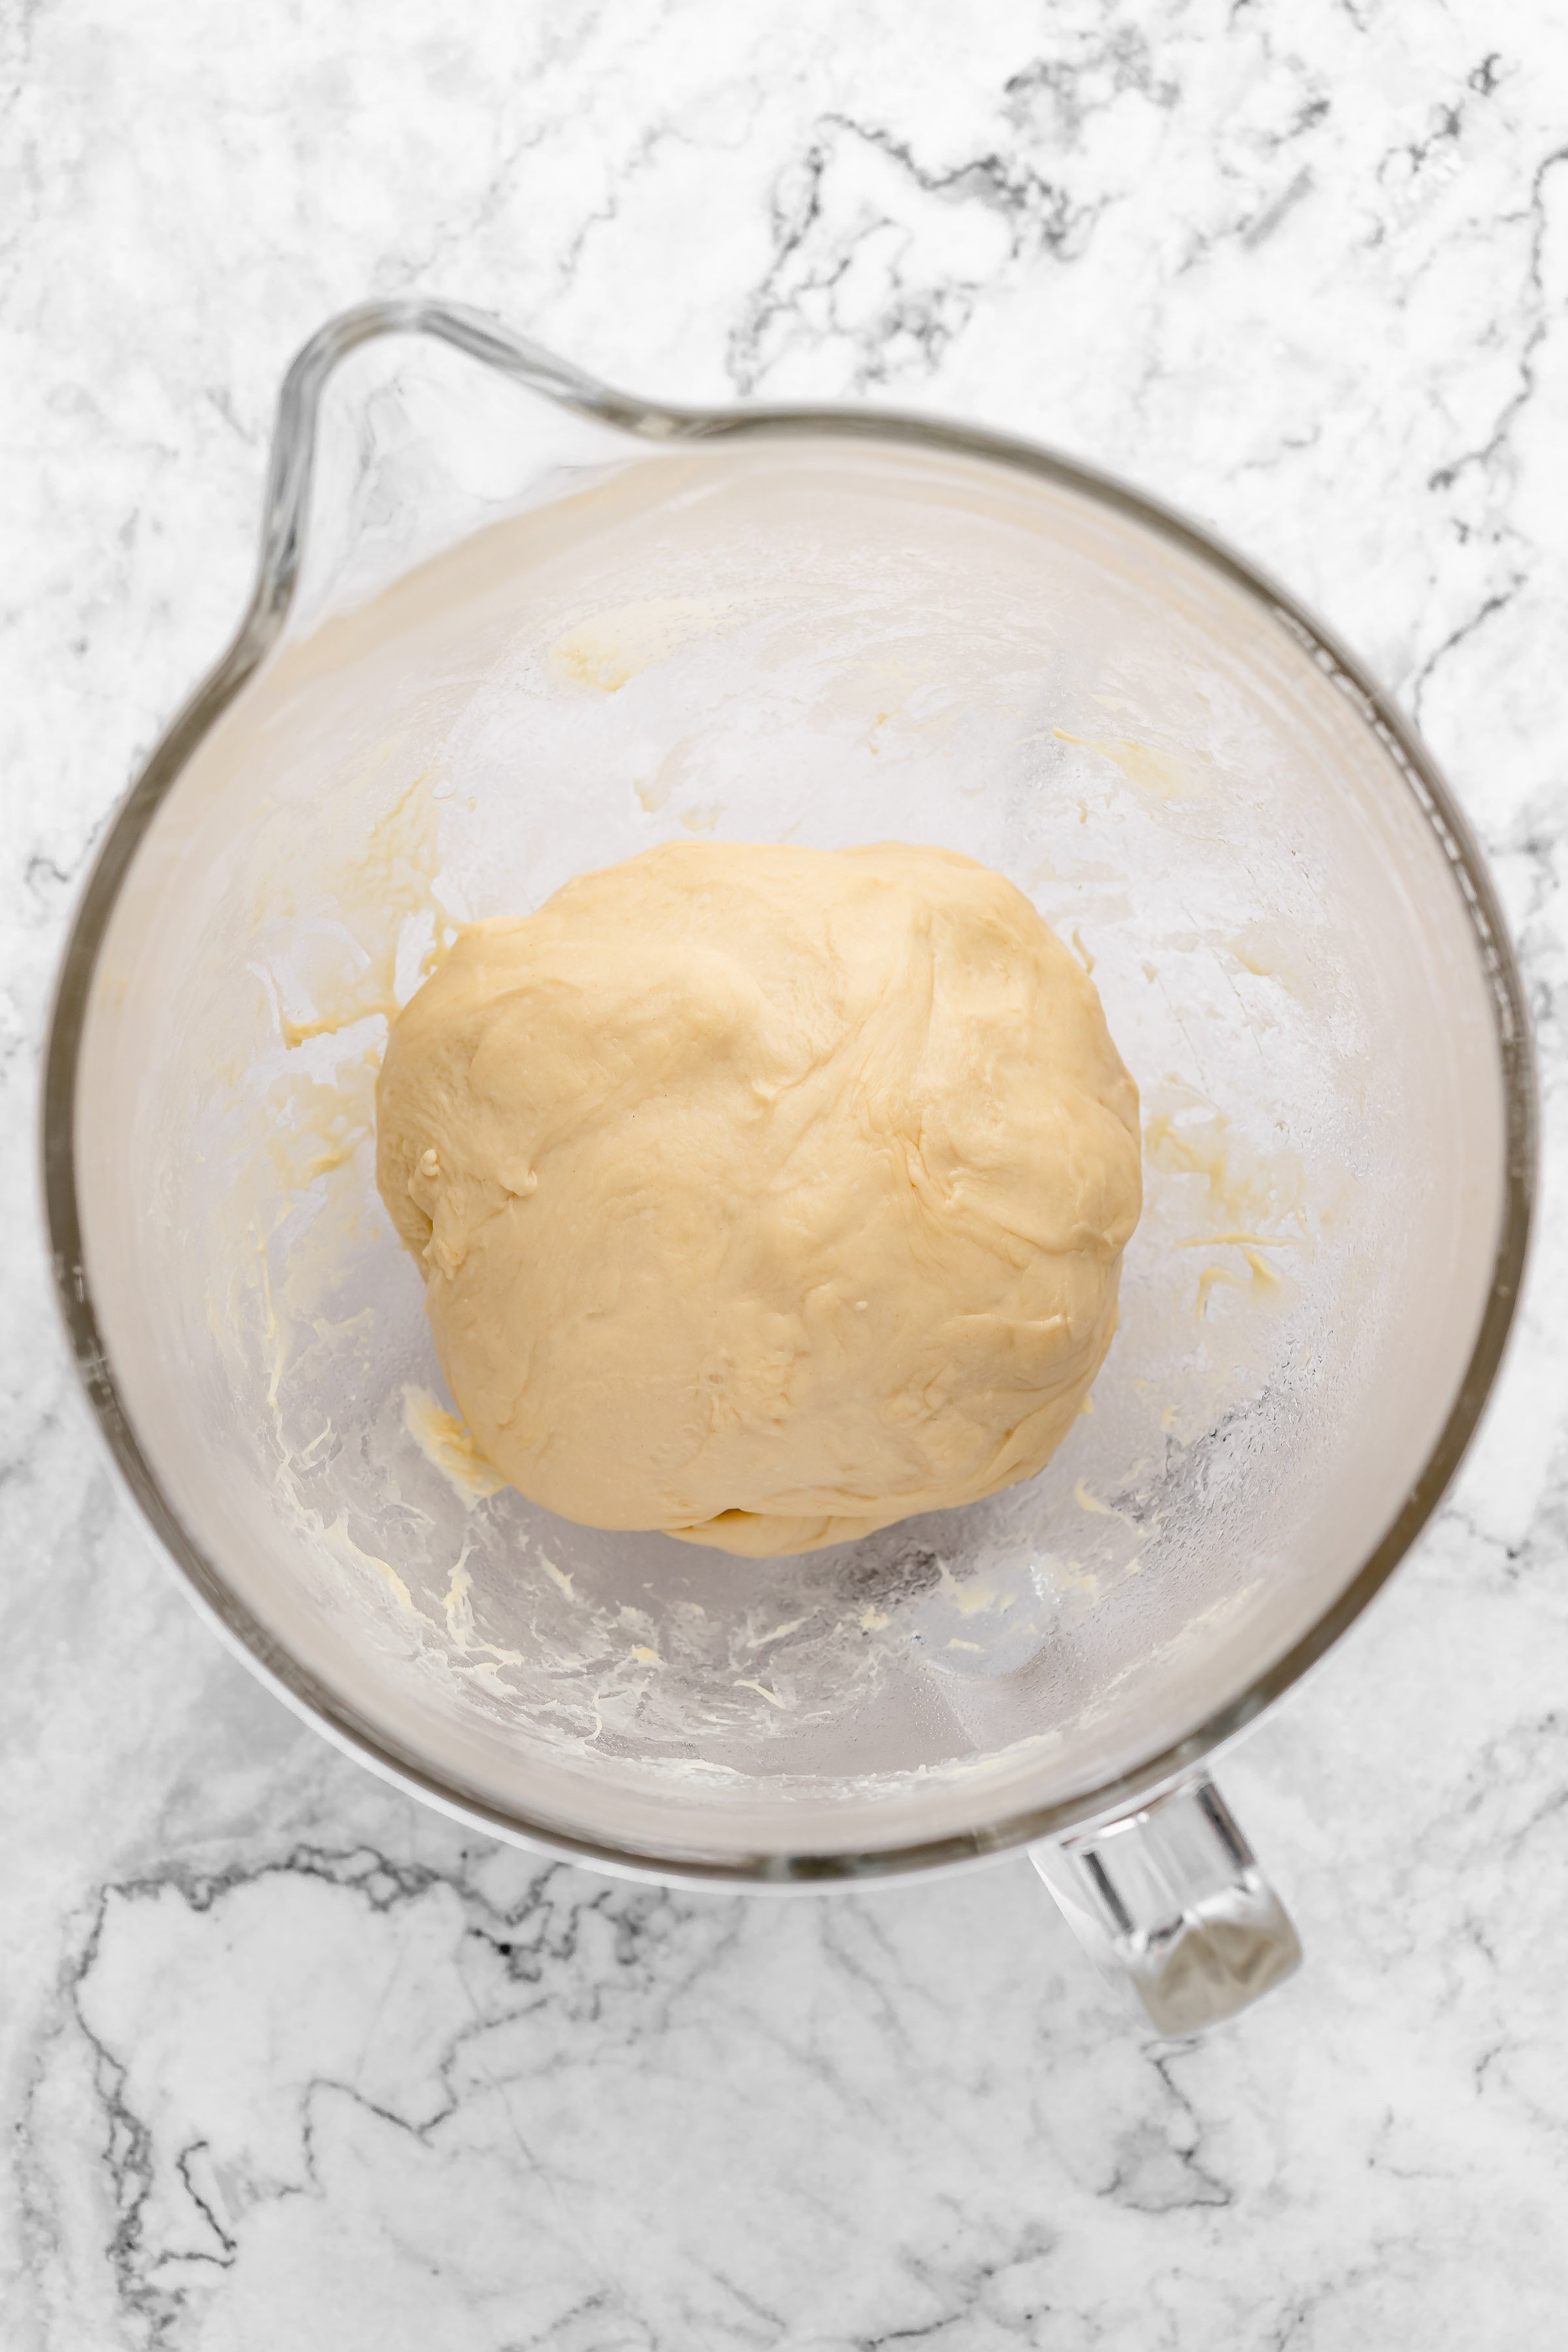 Overhead view of bread dough in glass mixing bowl